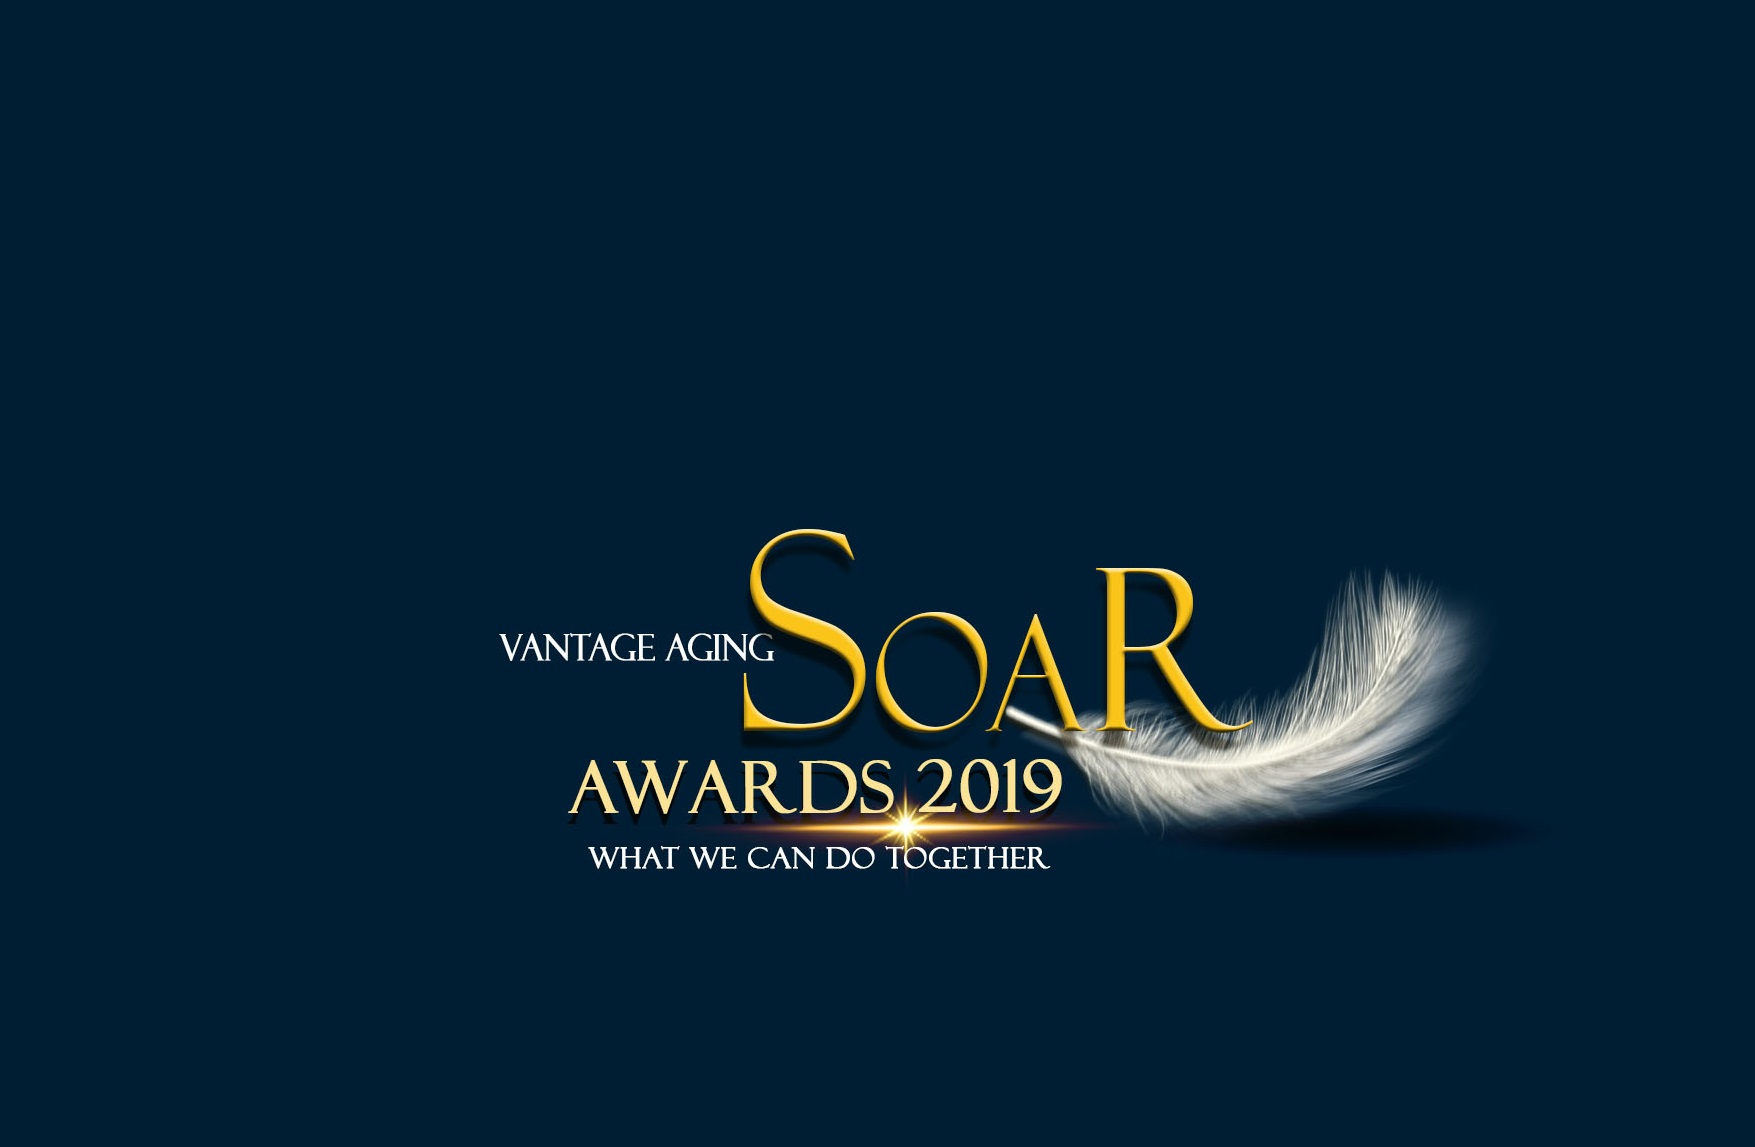 VANTAGE Aging’s SOAR Awards Nominees and Special Recognitions Announced